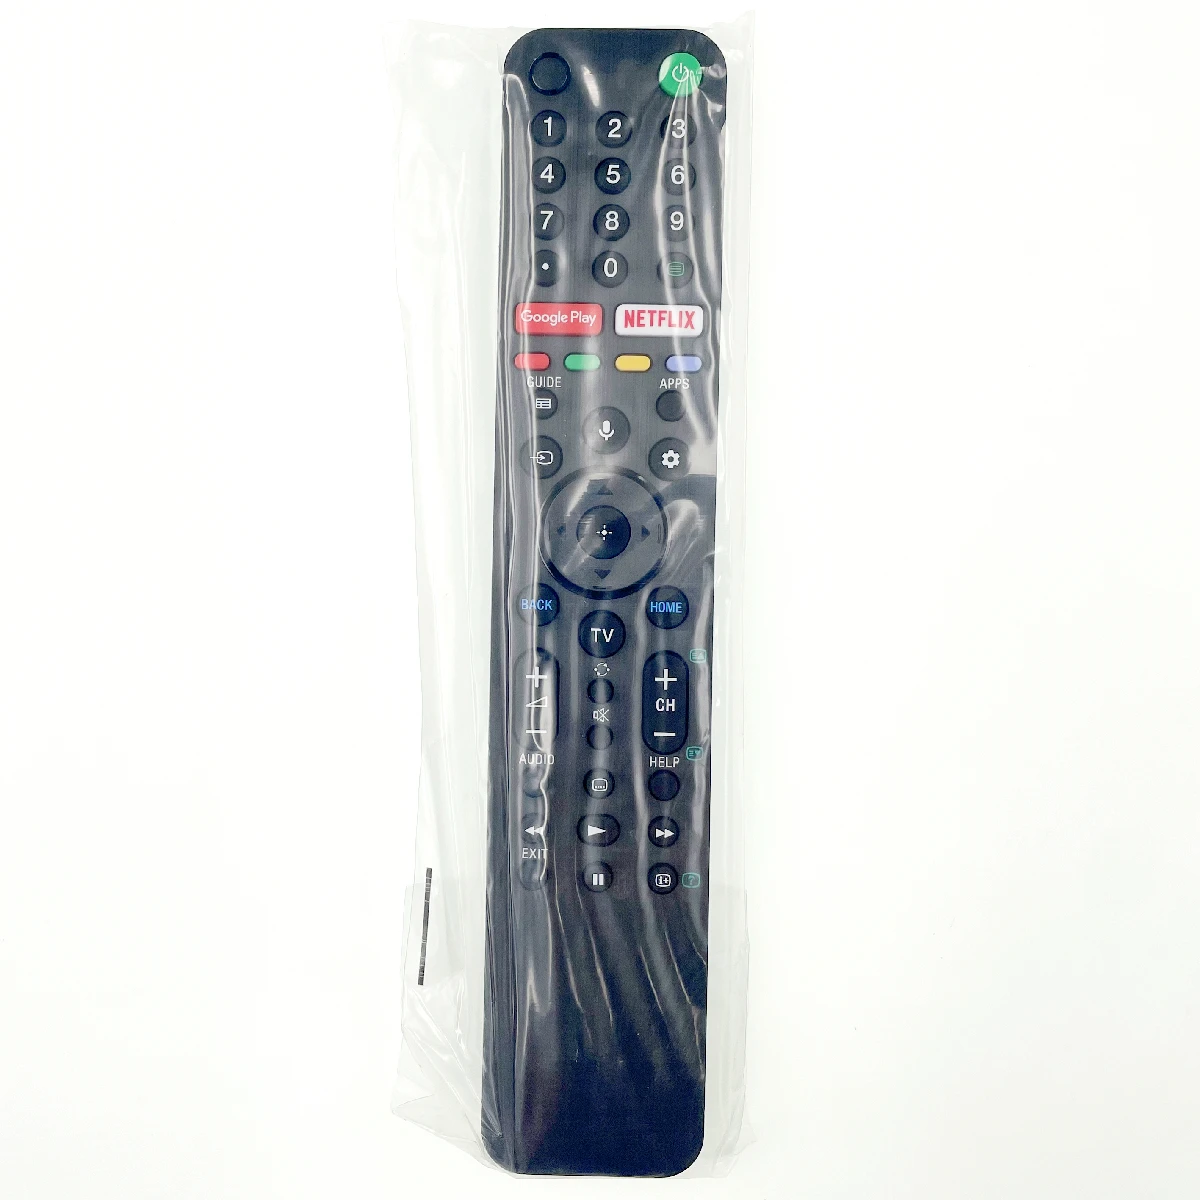 Voice Bluetooth TV Remote Control RMF-TX500P For SONY Bravia 4K Television  KD-65X7577H KD-65X7500H